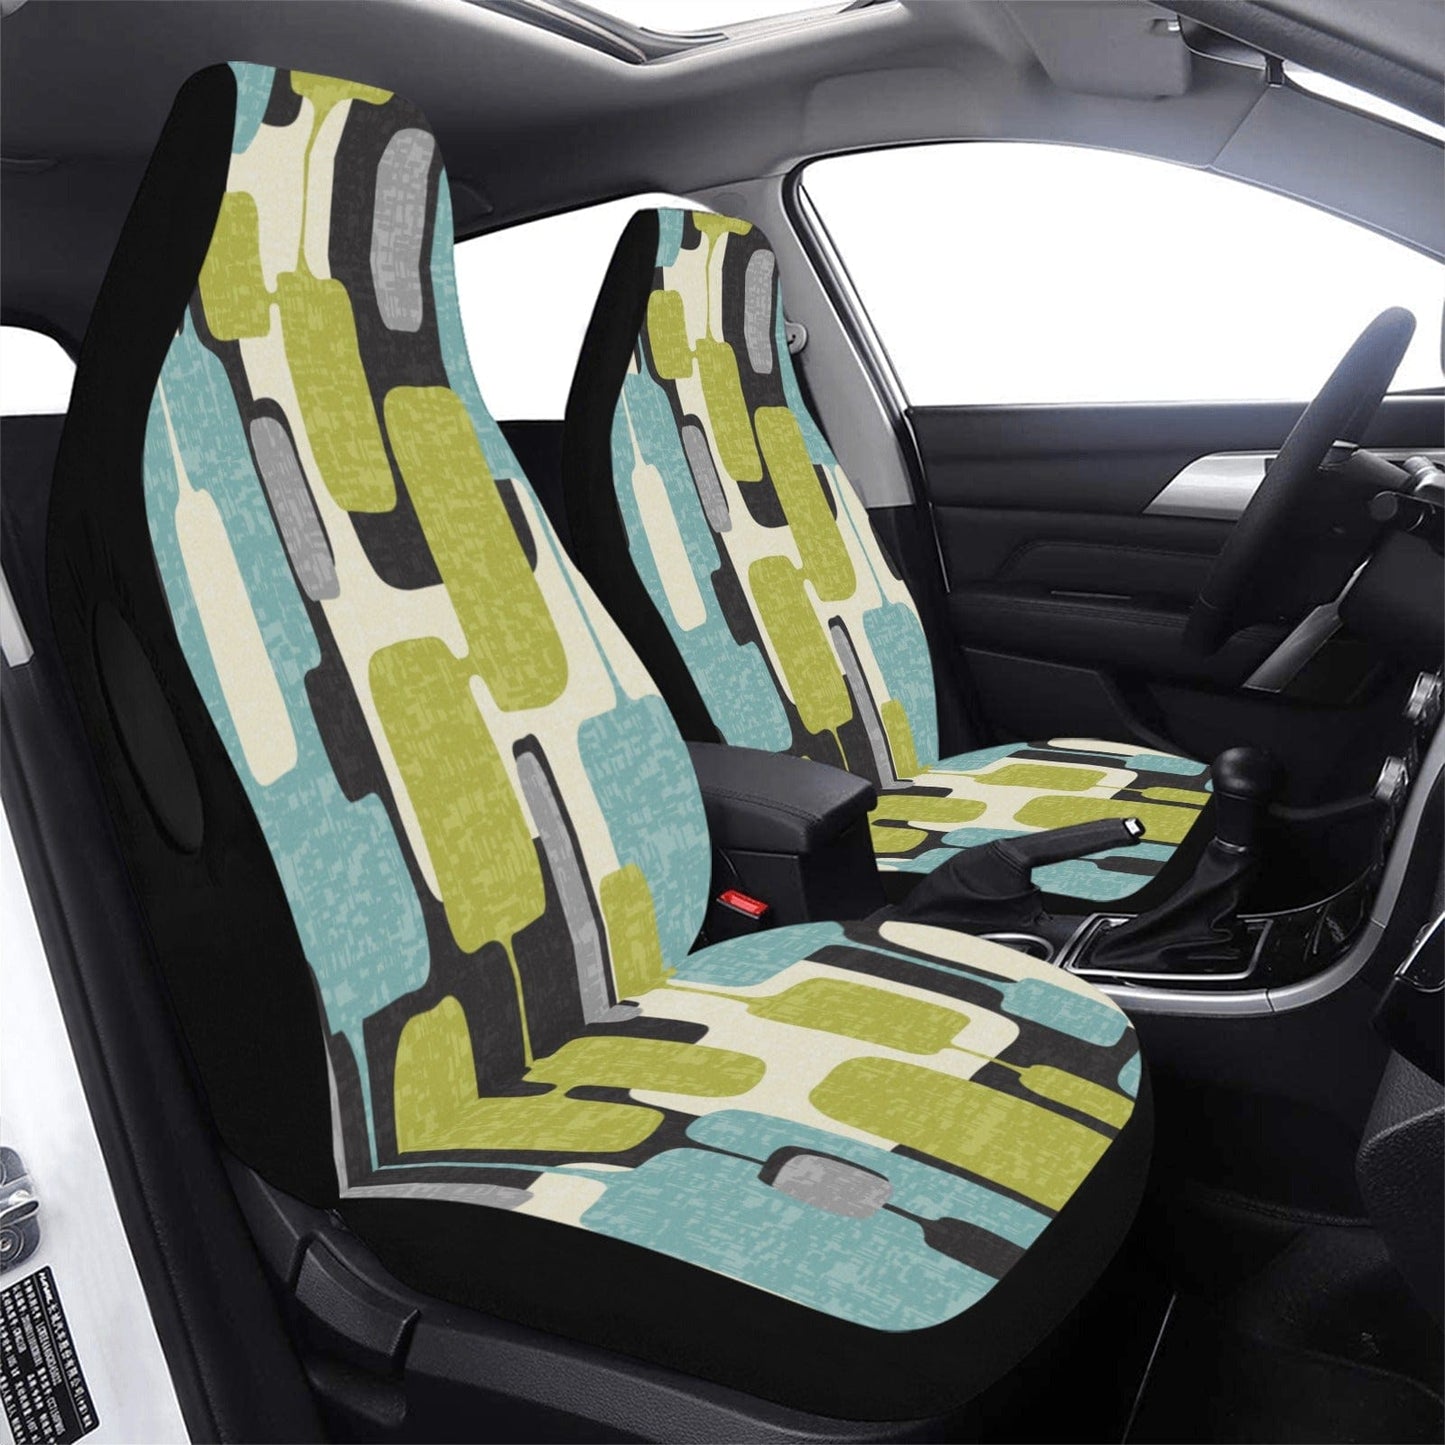 Kate McEnroe New York Mid Century Modern Retro Geometric Abstract Car Seat Covers Car Accessories One Size D2792848